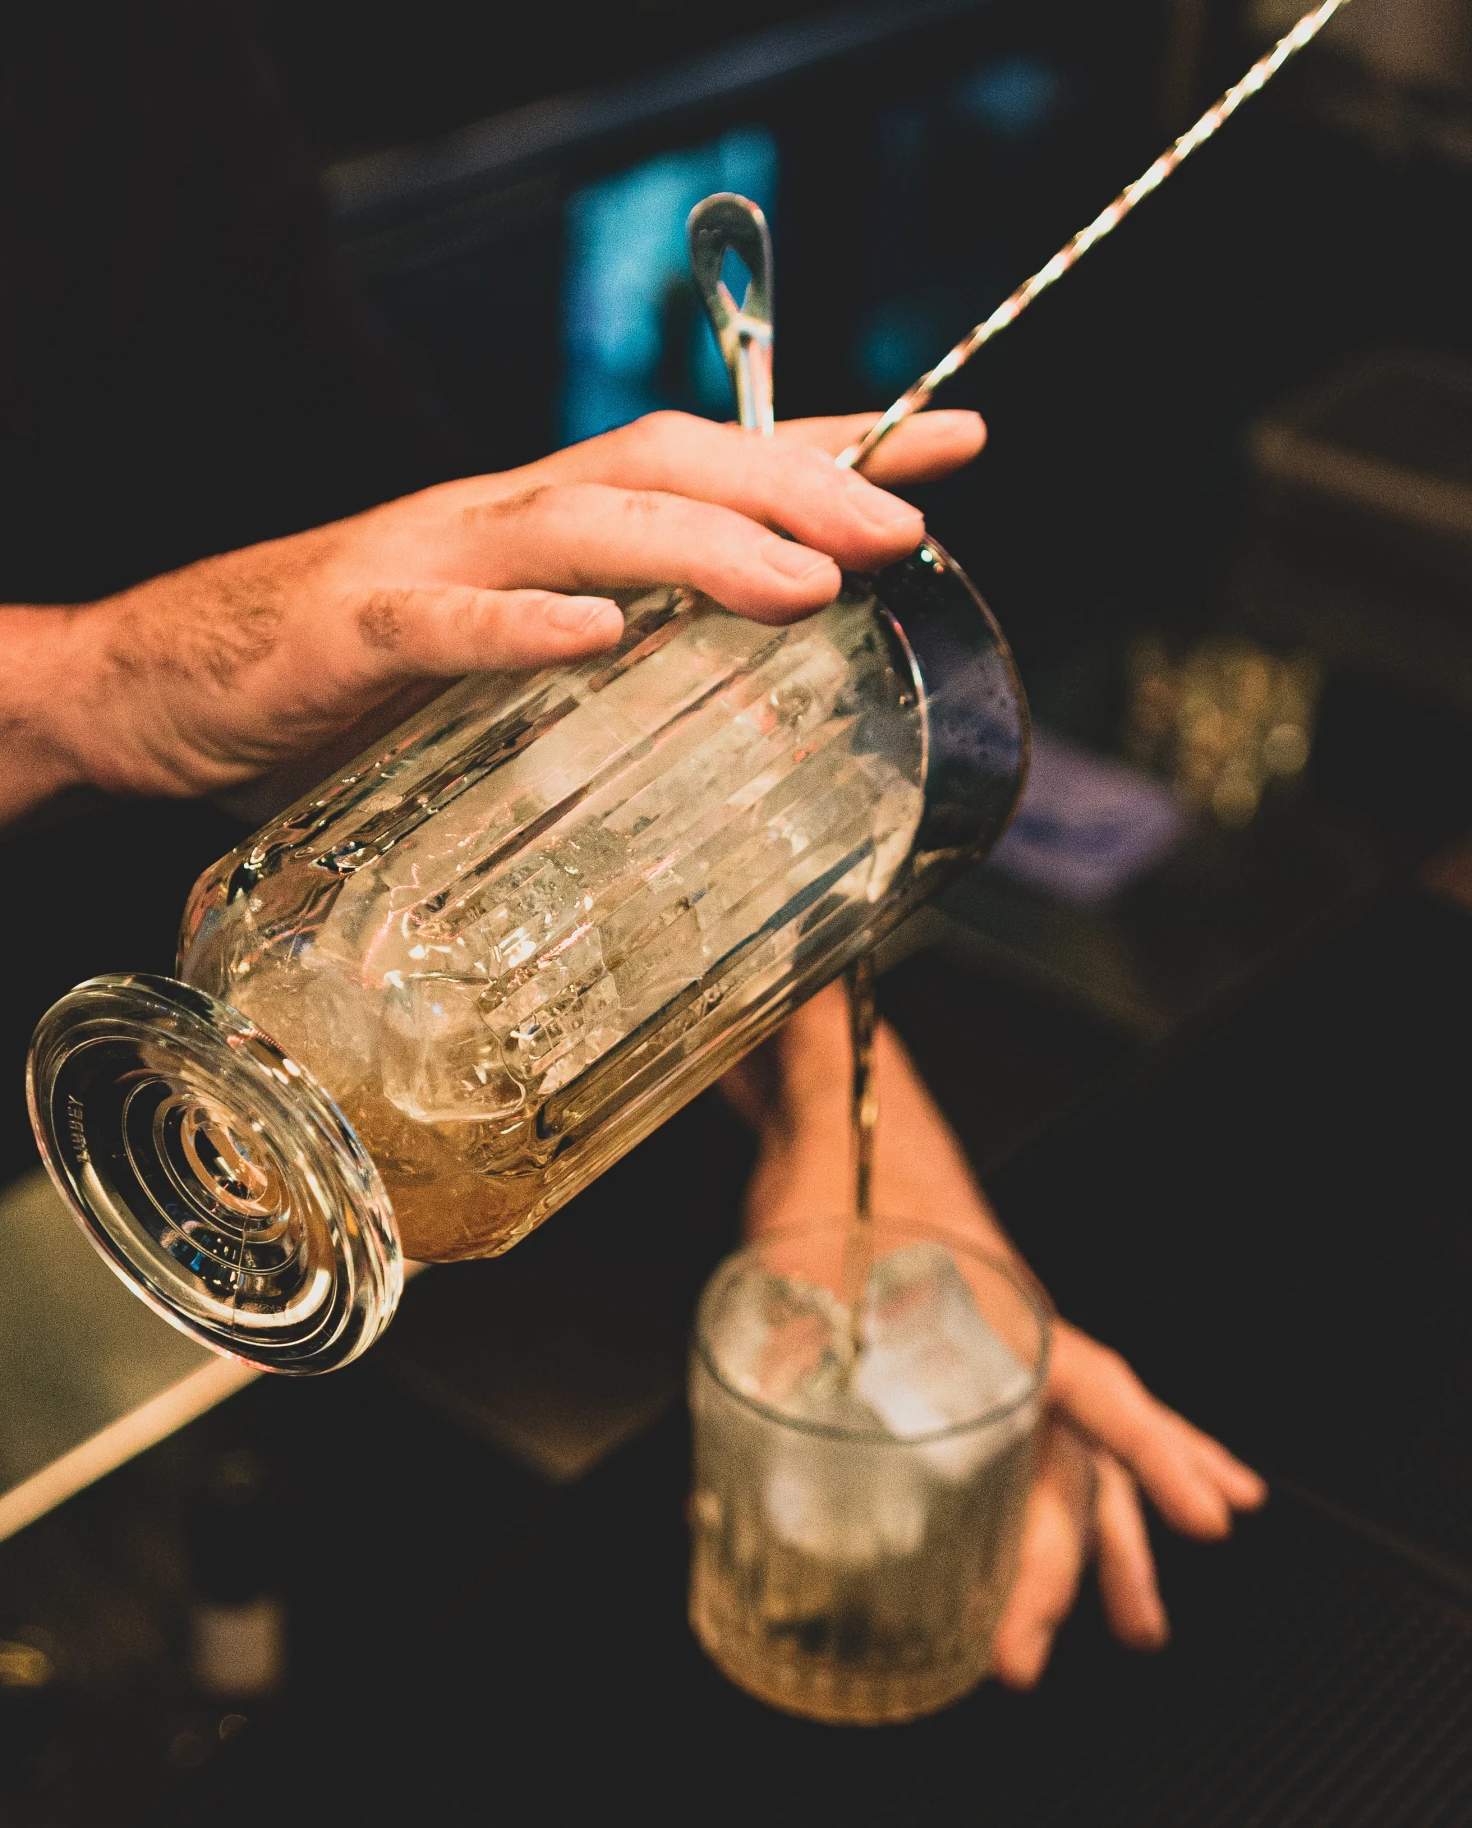 A bartender making a drink and pouring into cup. 